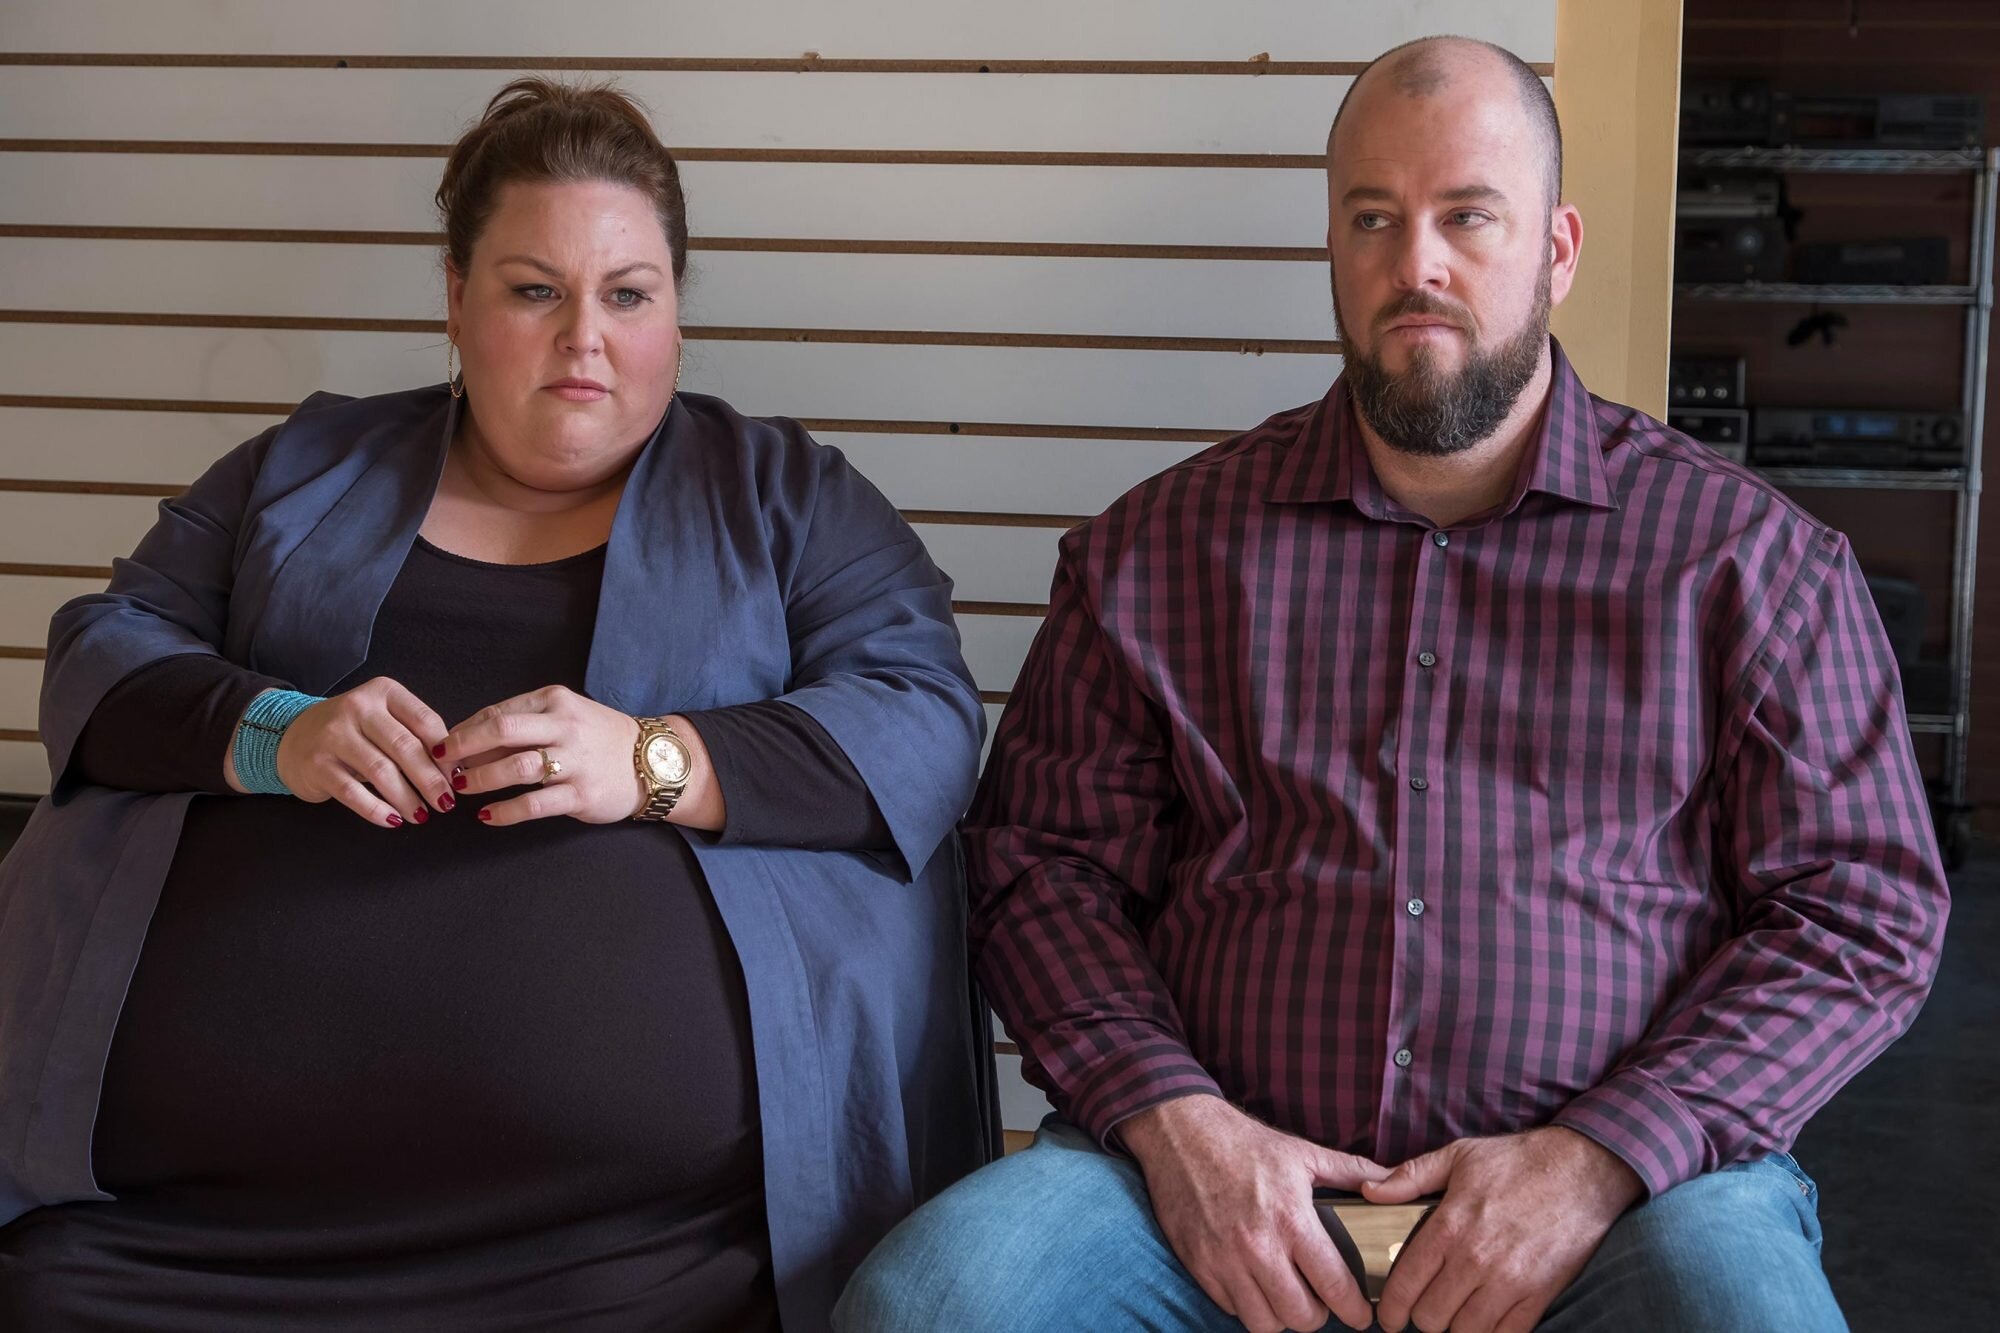 Chrissy Metz as Kate and Chris Sullivan as Toby in 'This Is Us'